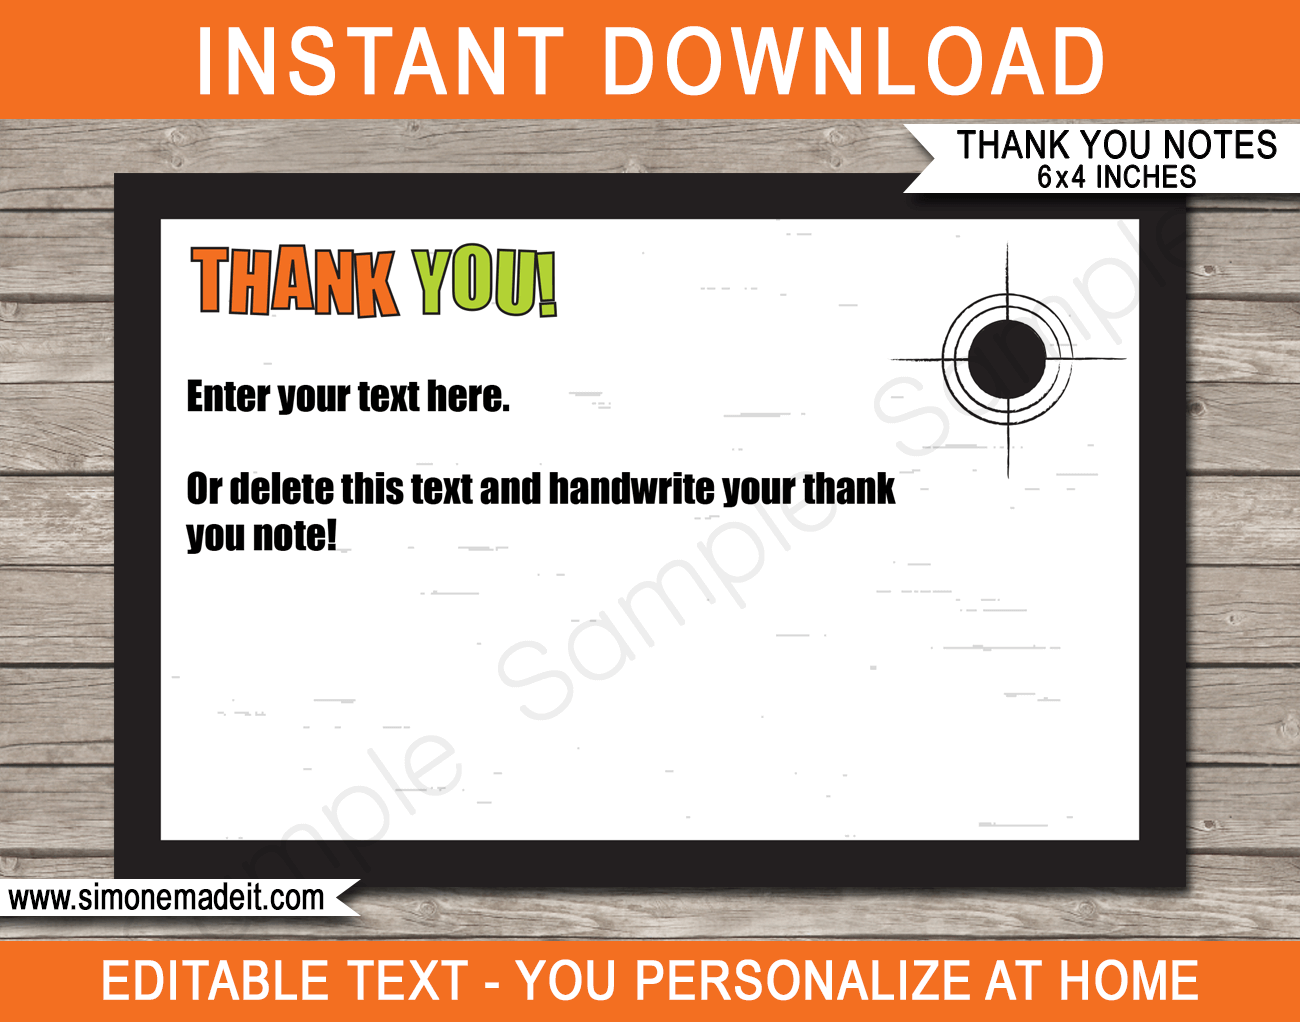 Printable Laser Tag Thank You Cards Template - Birthday Party - Editable Text - Instant Download via simonemadeit.com